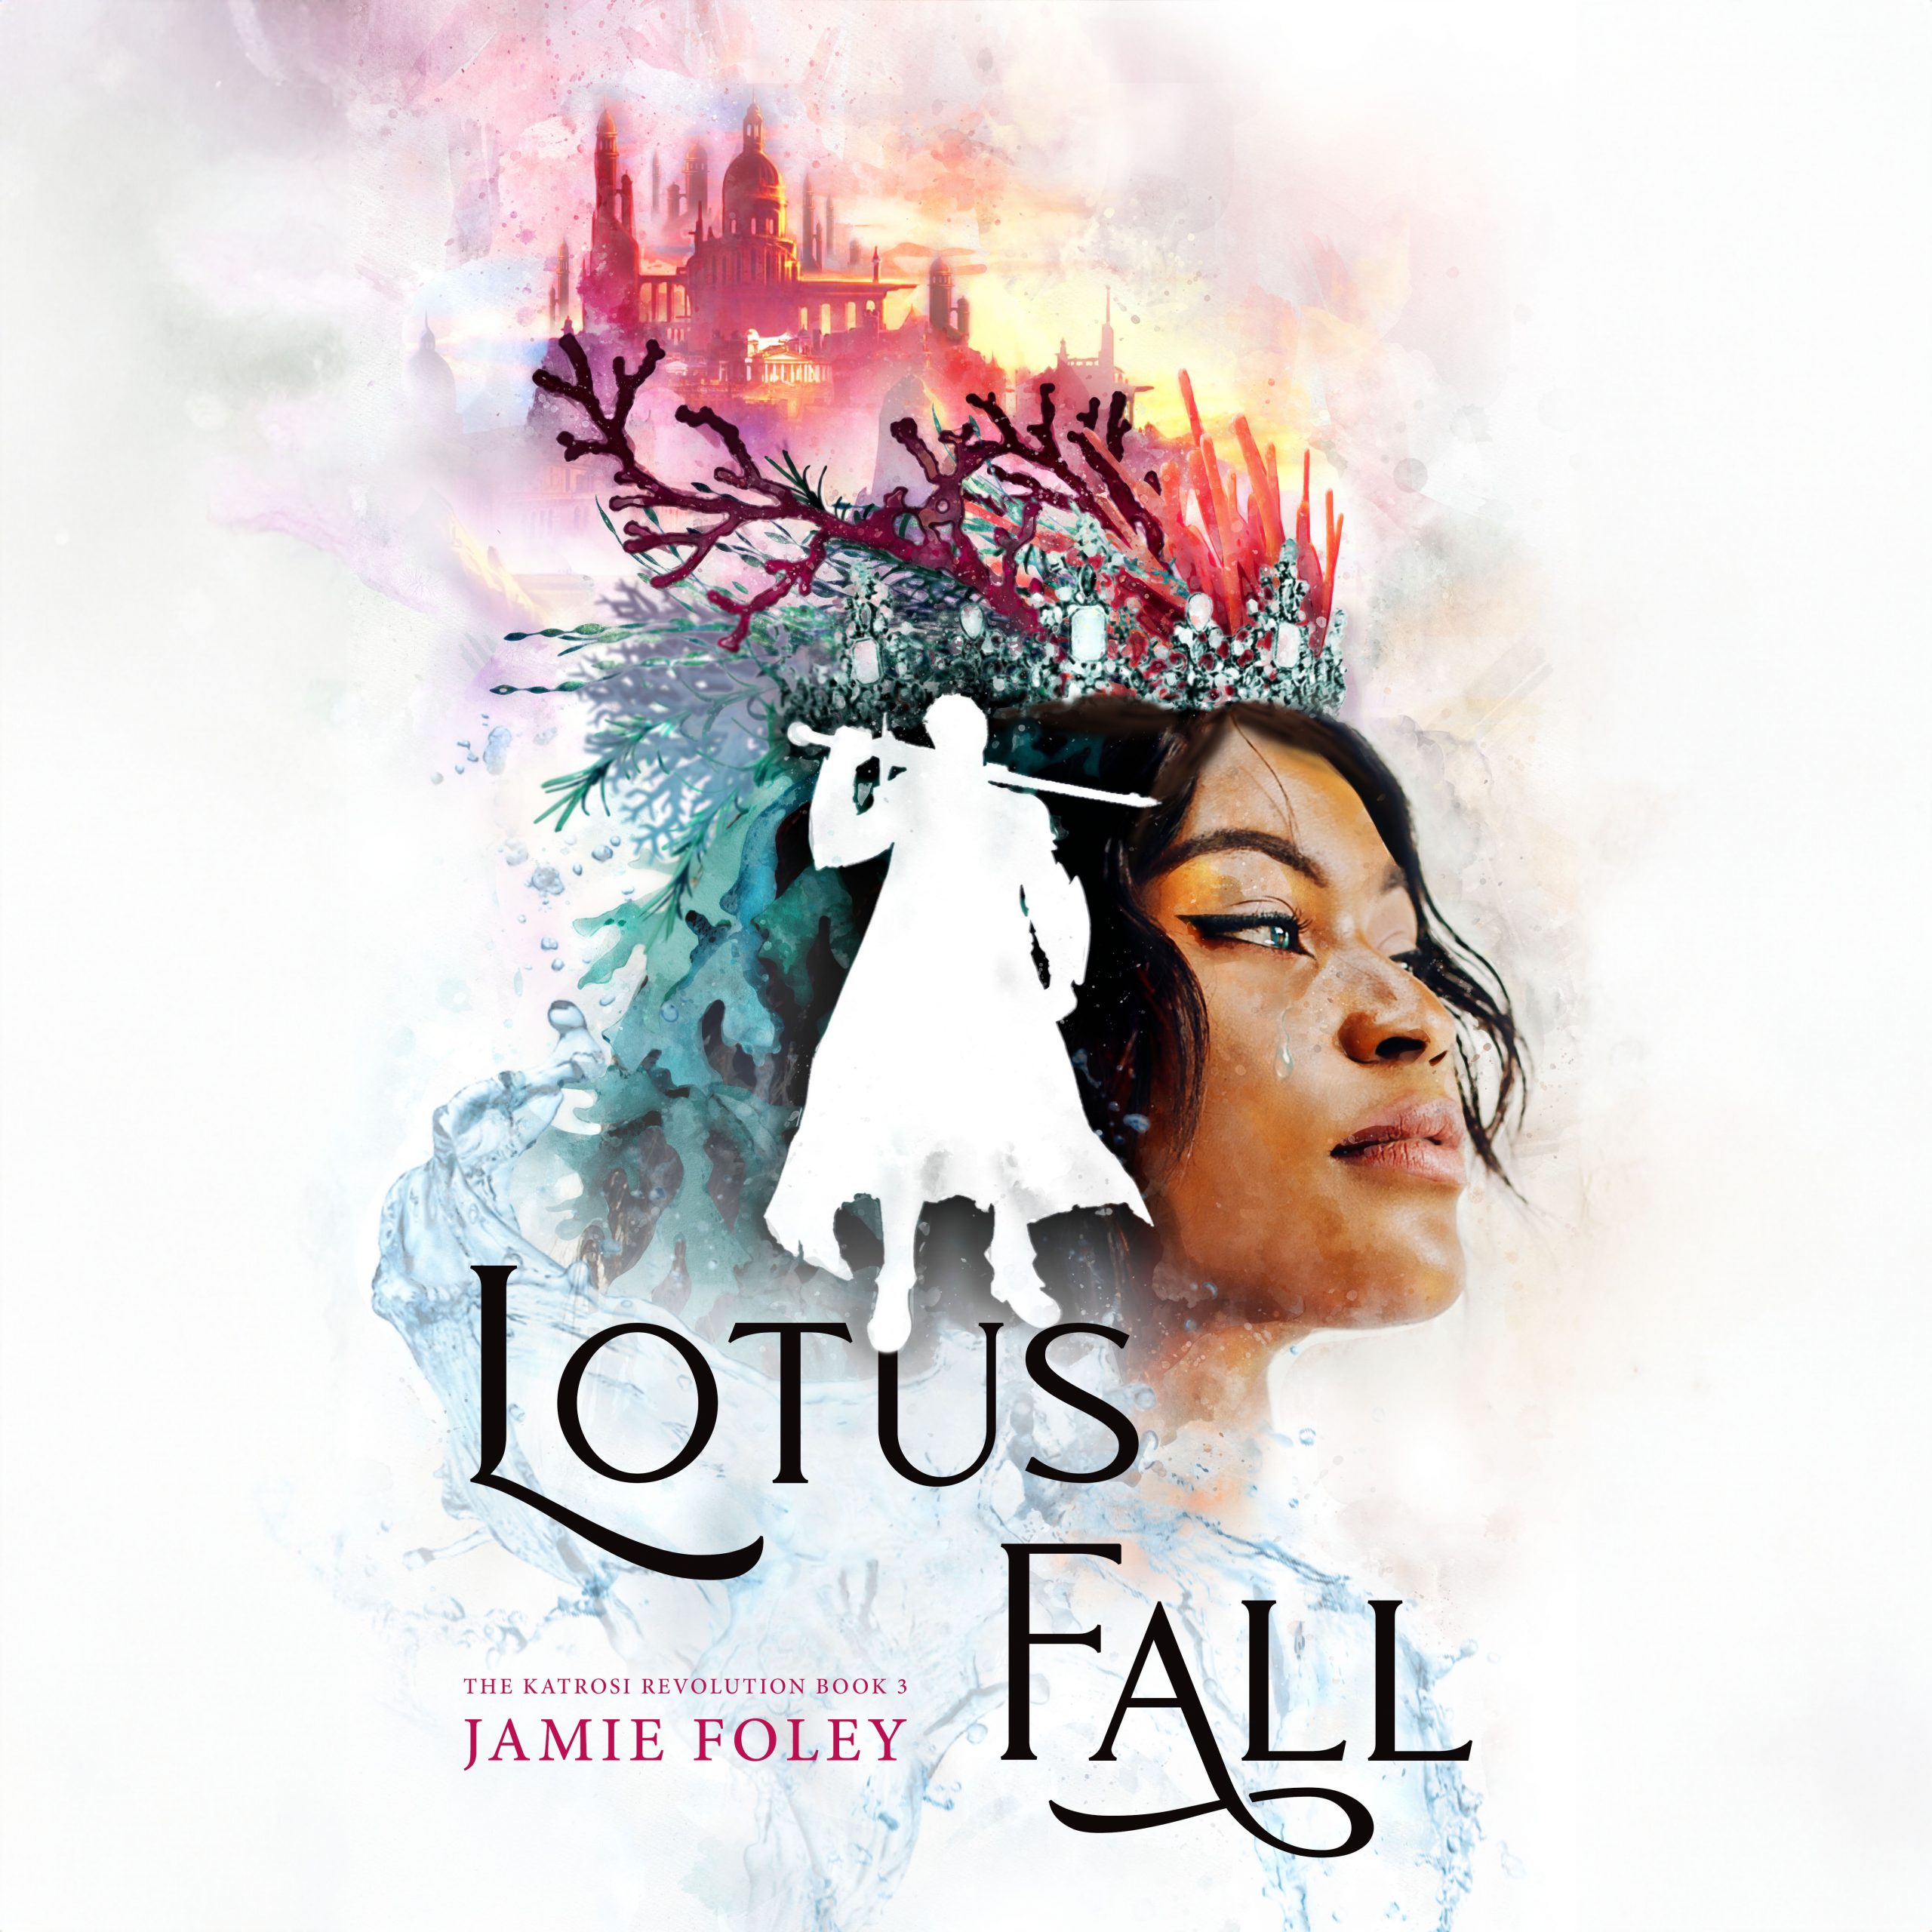 Cover reveal: Lotusfall